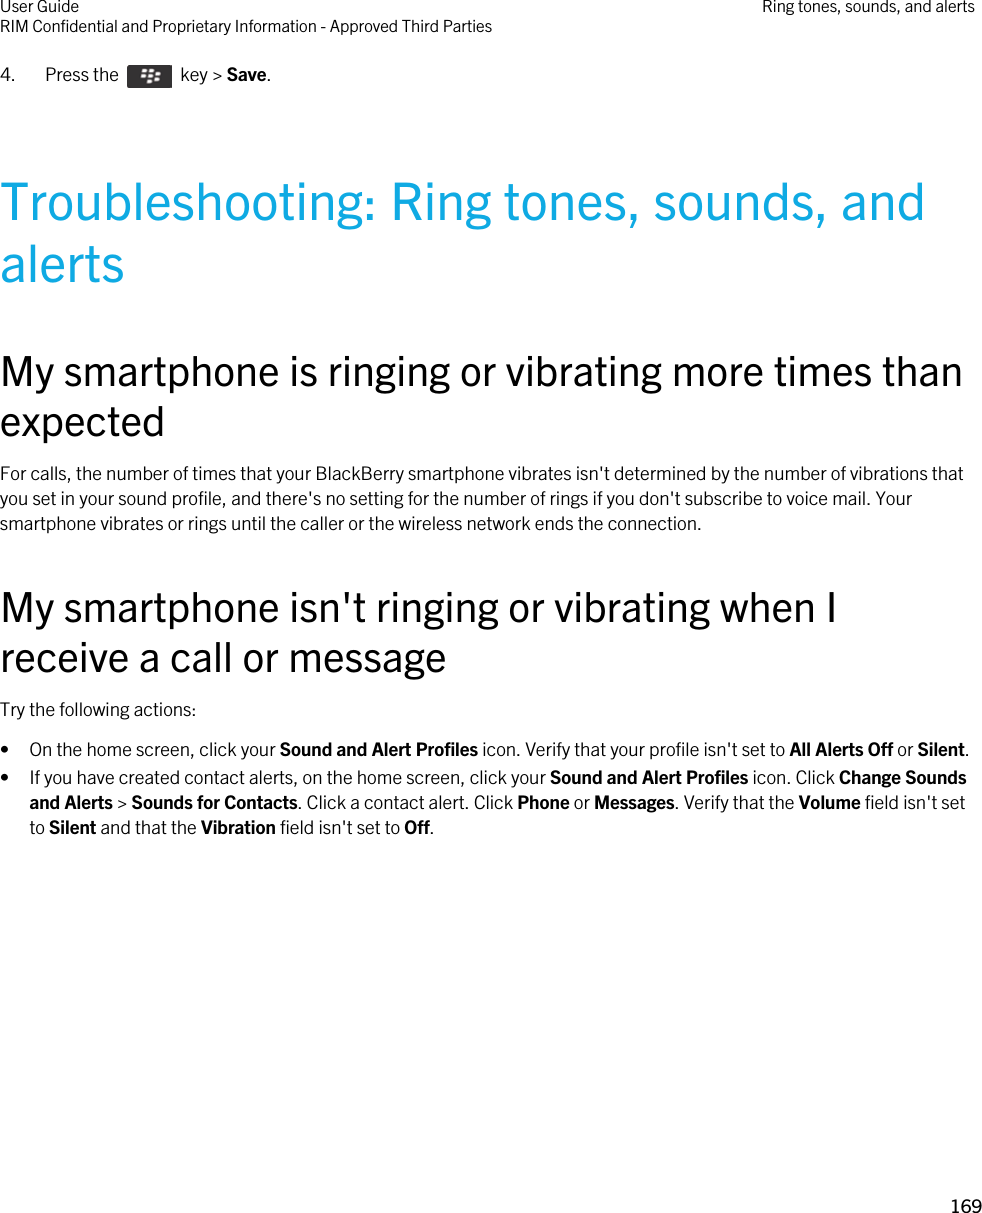 4.  Press the    key &gt; Save. Troubleshooting: Ring tones, sounds, and alertsMy smartphone is ringing or vibrating more times than expectedFor calls, the number of times that your BlackBerry smartphone vibrates isn&apos;t determined by the number of vibrations that you set in your sound profile, and there&apos;s no setting for the number of rings if you don&apos;t subscribe to voice mail. Your smartphone vibrates or rings until the caller or the wireless network ends the connection.My smartphone isn&apos;t ringing or vibrating when I receive a call or messageTry the following actions:• On the home screen, click your Sound and Alert Profiles icon. Verify that your profile isn&apos;t set to All Alerts Off or Silent.• If you have created contact alerts, on the home screen, click your Sound and Alert Profiles icon. Click Change Sounds and Alerts &gt; Sounds for Contacts. Click a contact alert. Click Phone or Messages. Verify that the Volume field isn&apos;t set to Silent and that the Vibration field isn&apos;t set to Off.User GuideRIM Confidential and Proprietary Information - Approved Third Parties Ring tones, sounds, and alerts169 